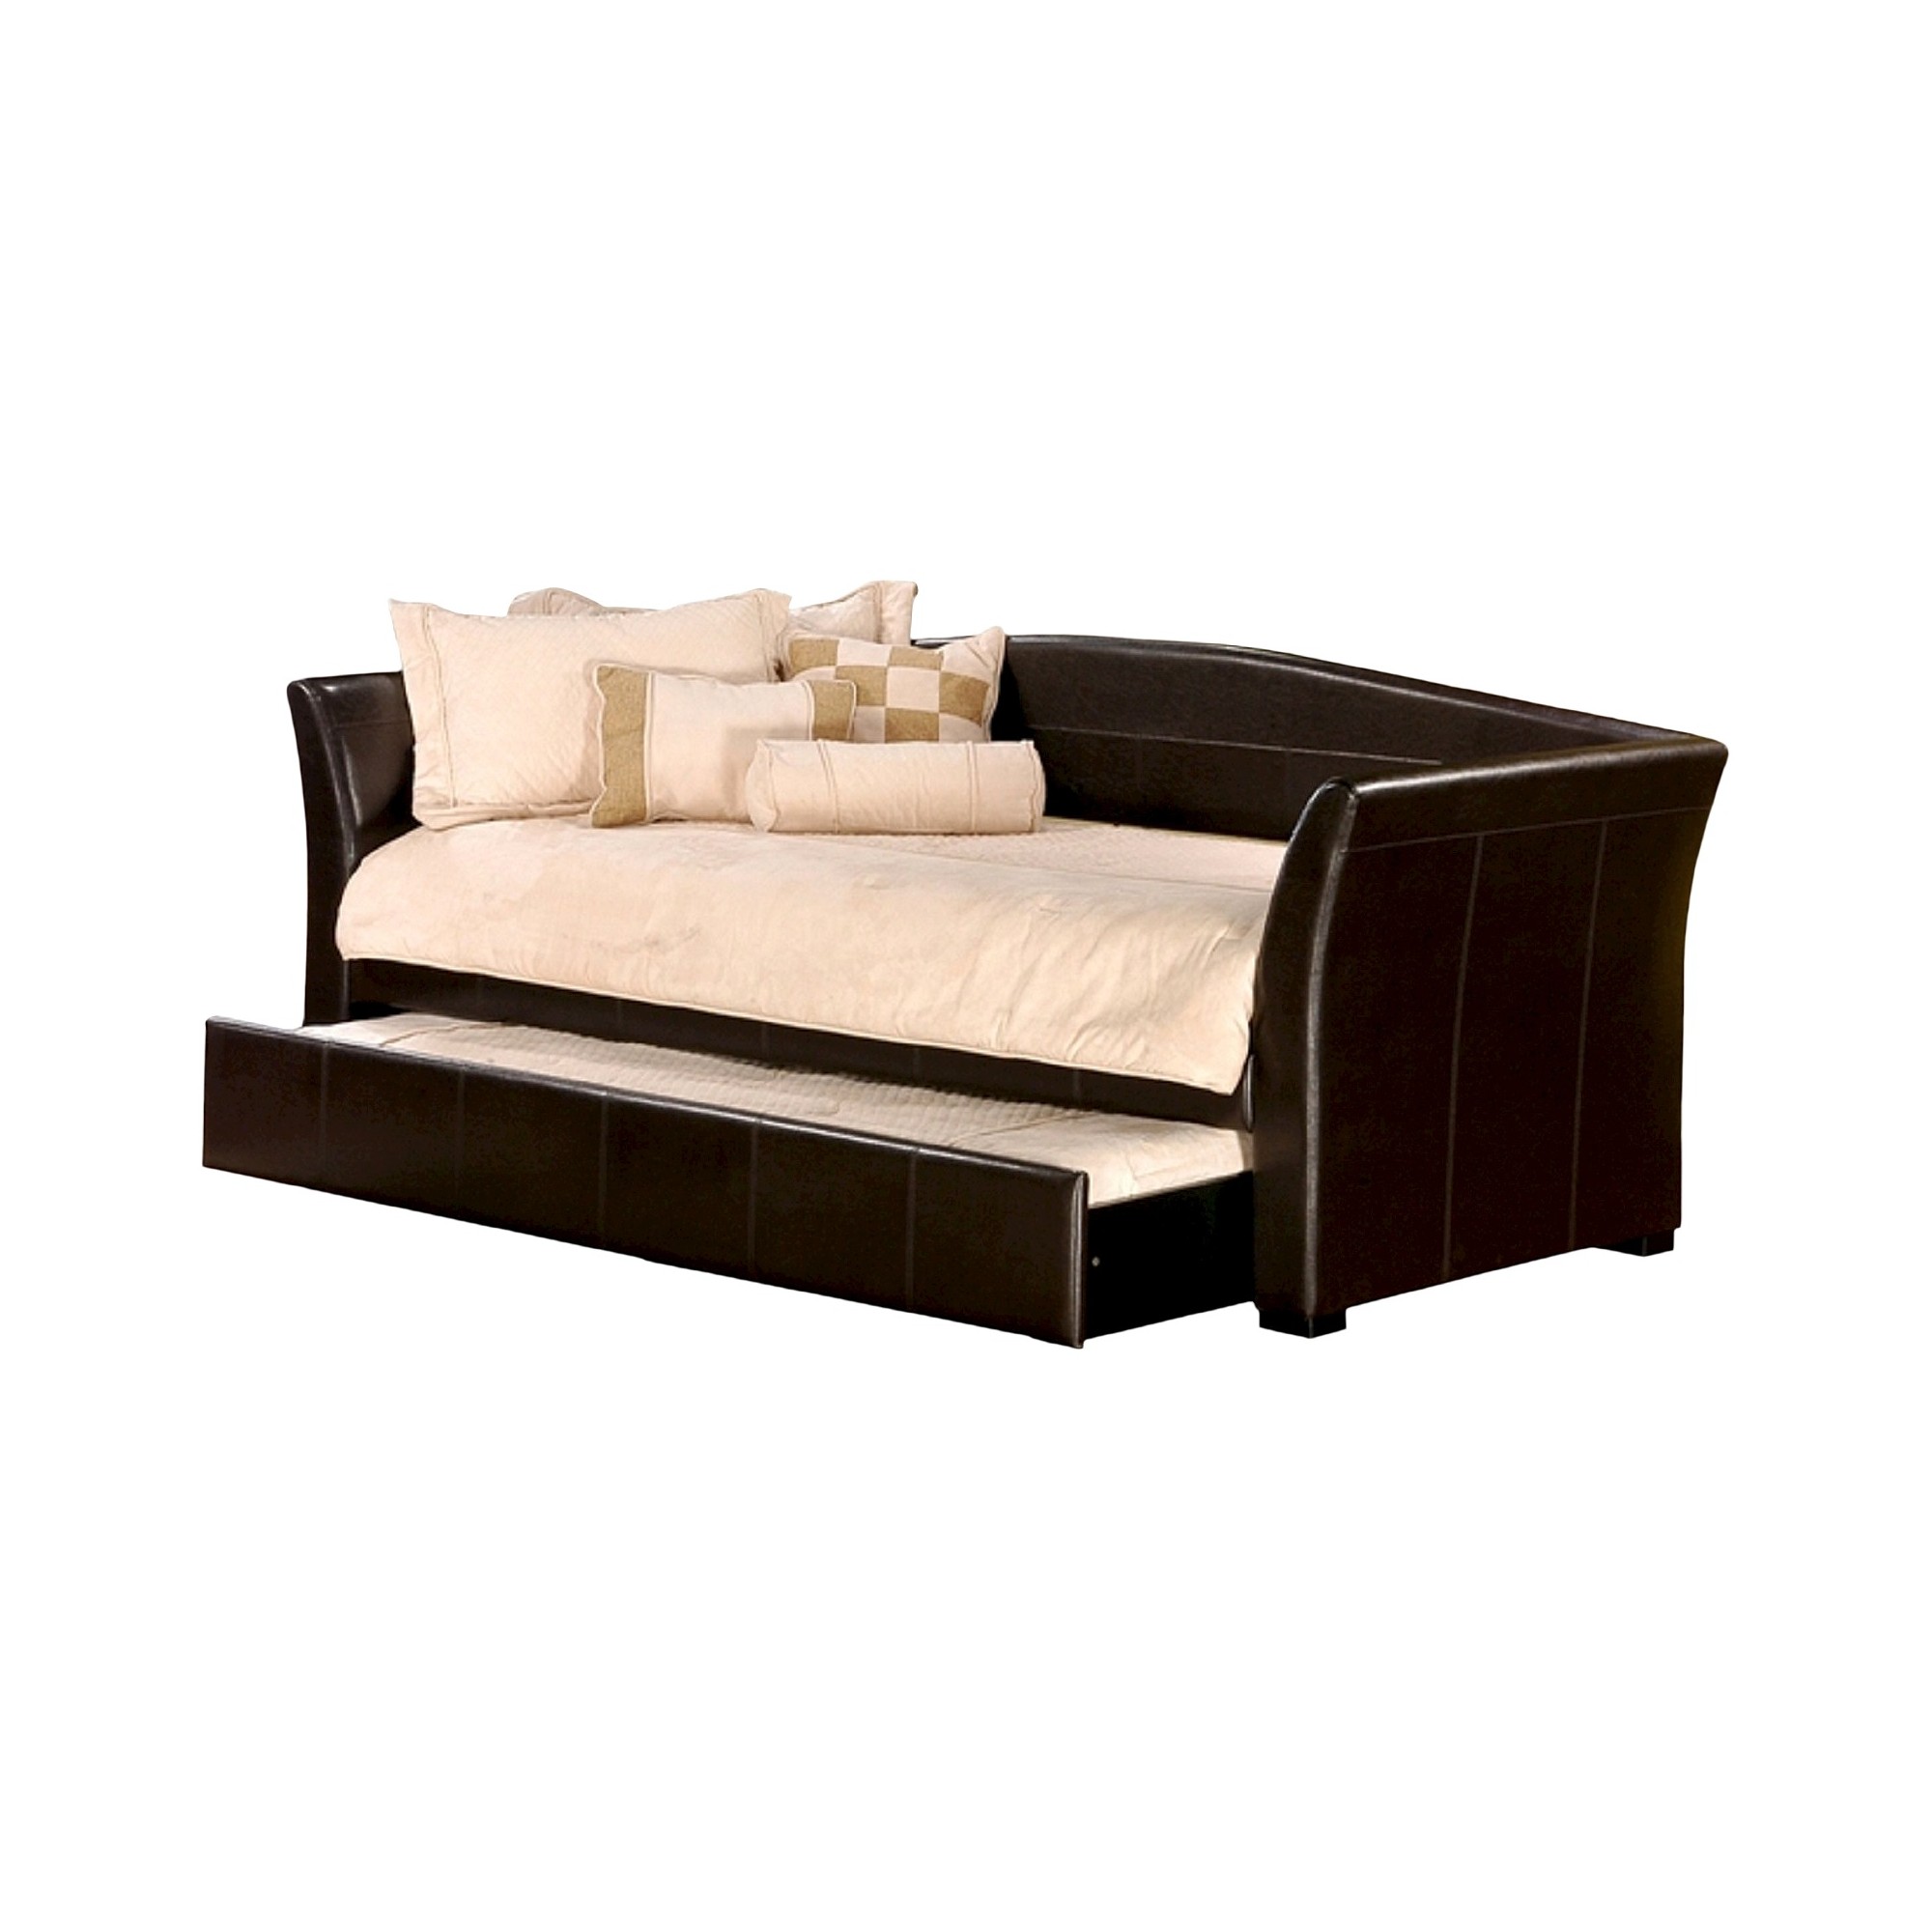 Montgomery Daybed with Trundle - Hillsdale Furniture